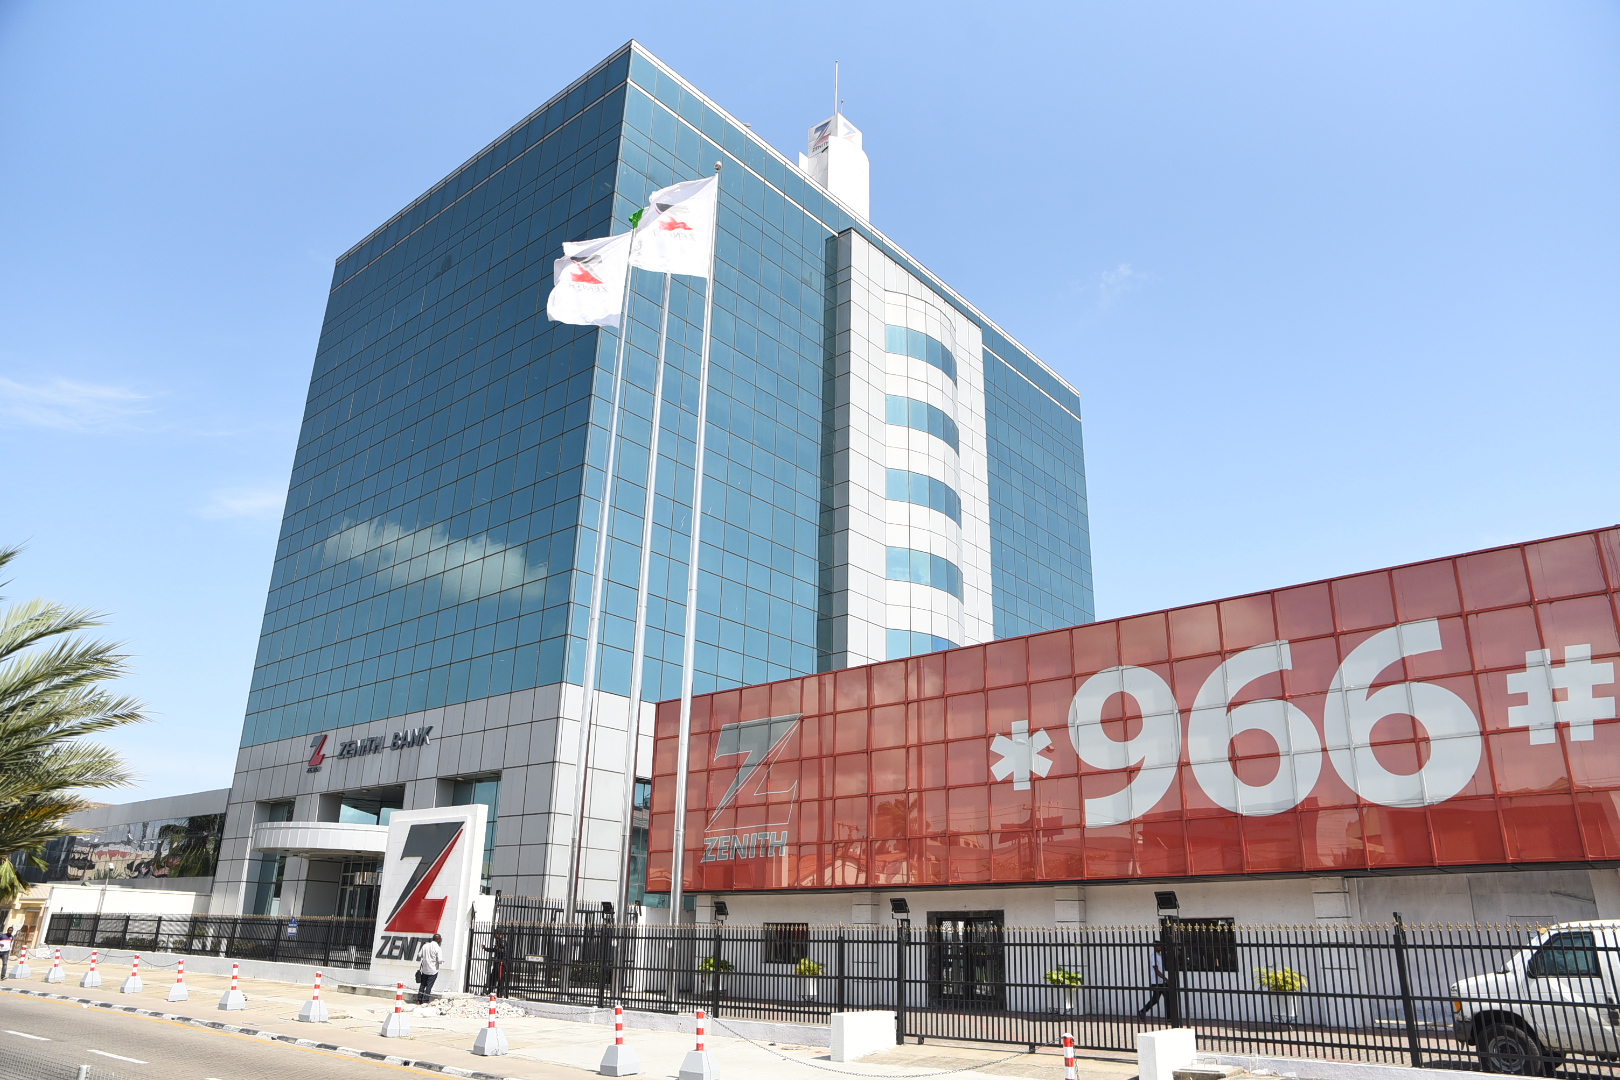 Read more about the article ZENITH BANK PLC IS SET TO PAY SHAREHOLDERS N97.32 BILLION TOTAL DIVIDEND FOR THE FINANCIAL YEAR 2021